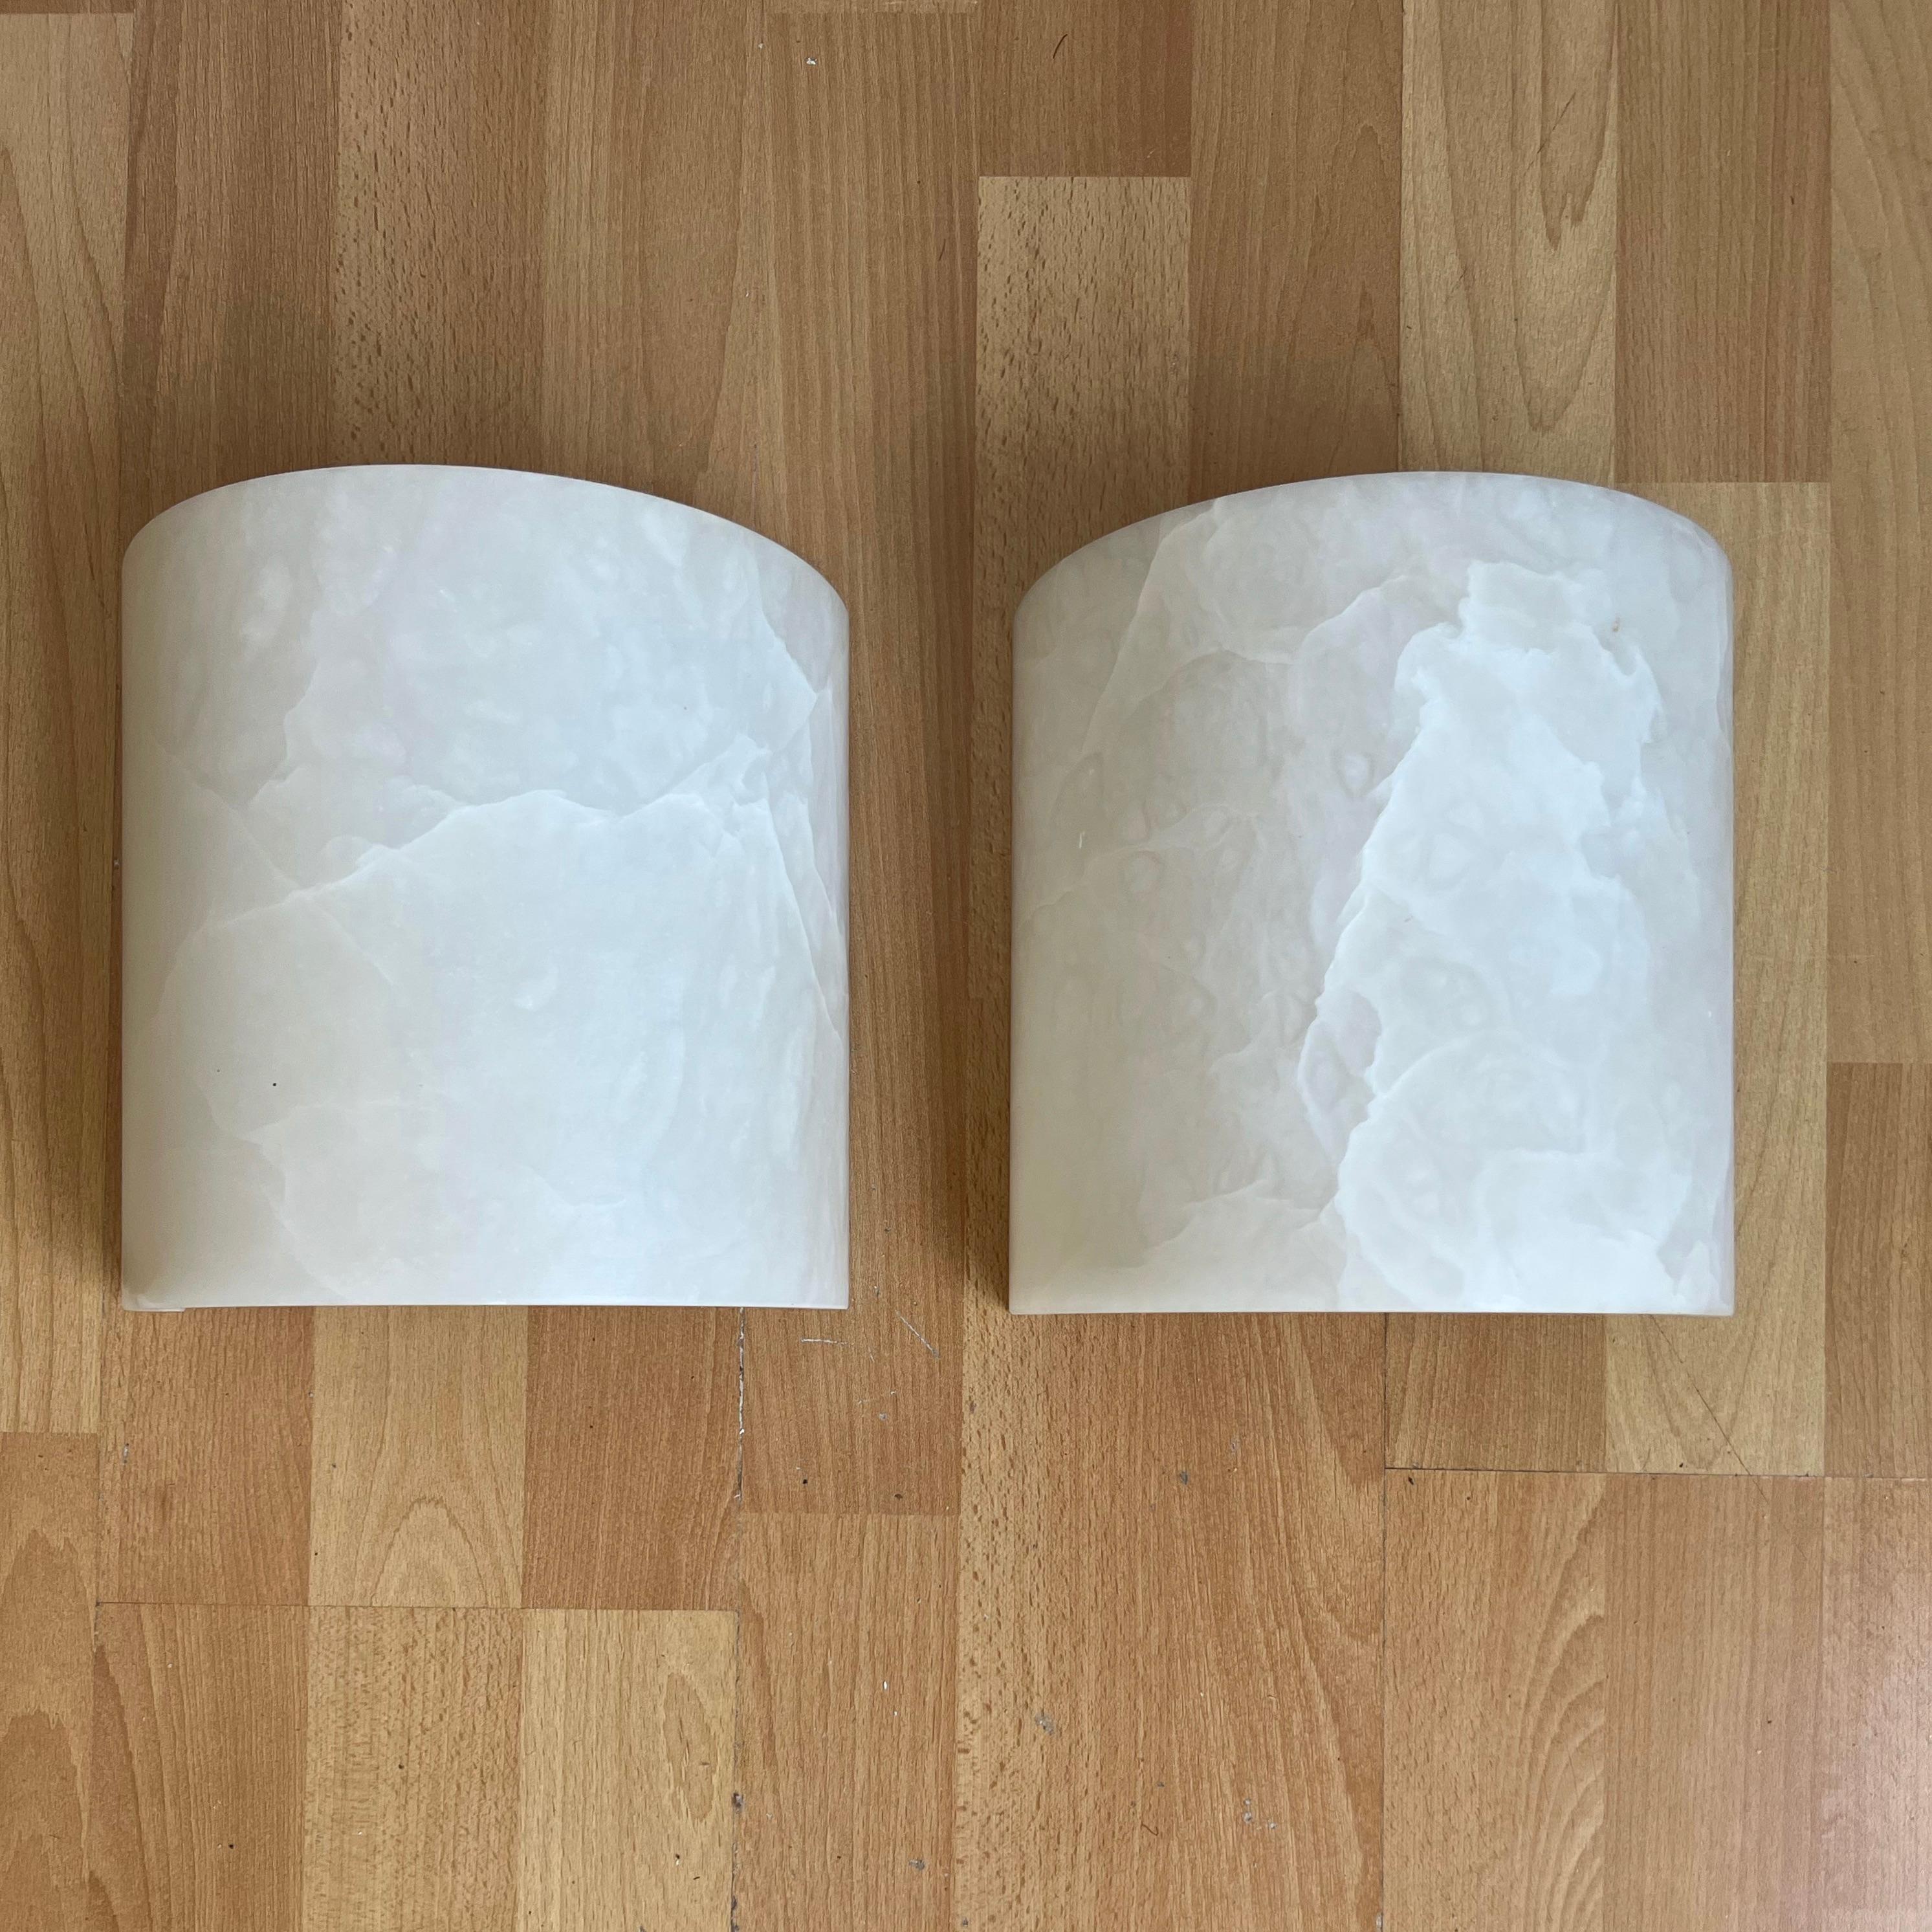 Handcrafted and very stylish pair of midcentury made alabaster 2-light (up & down) wall lights.

If you are looking for a great shape and practical size pair of sconces to grace your living space then these natural mineral stone fixtures could be